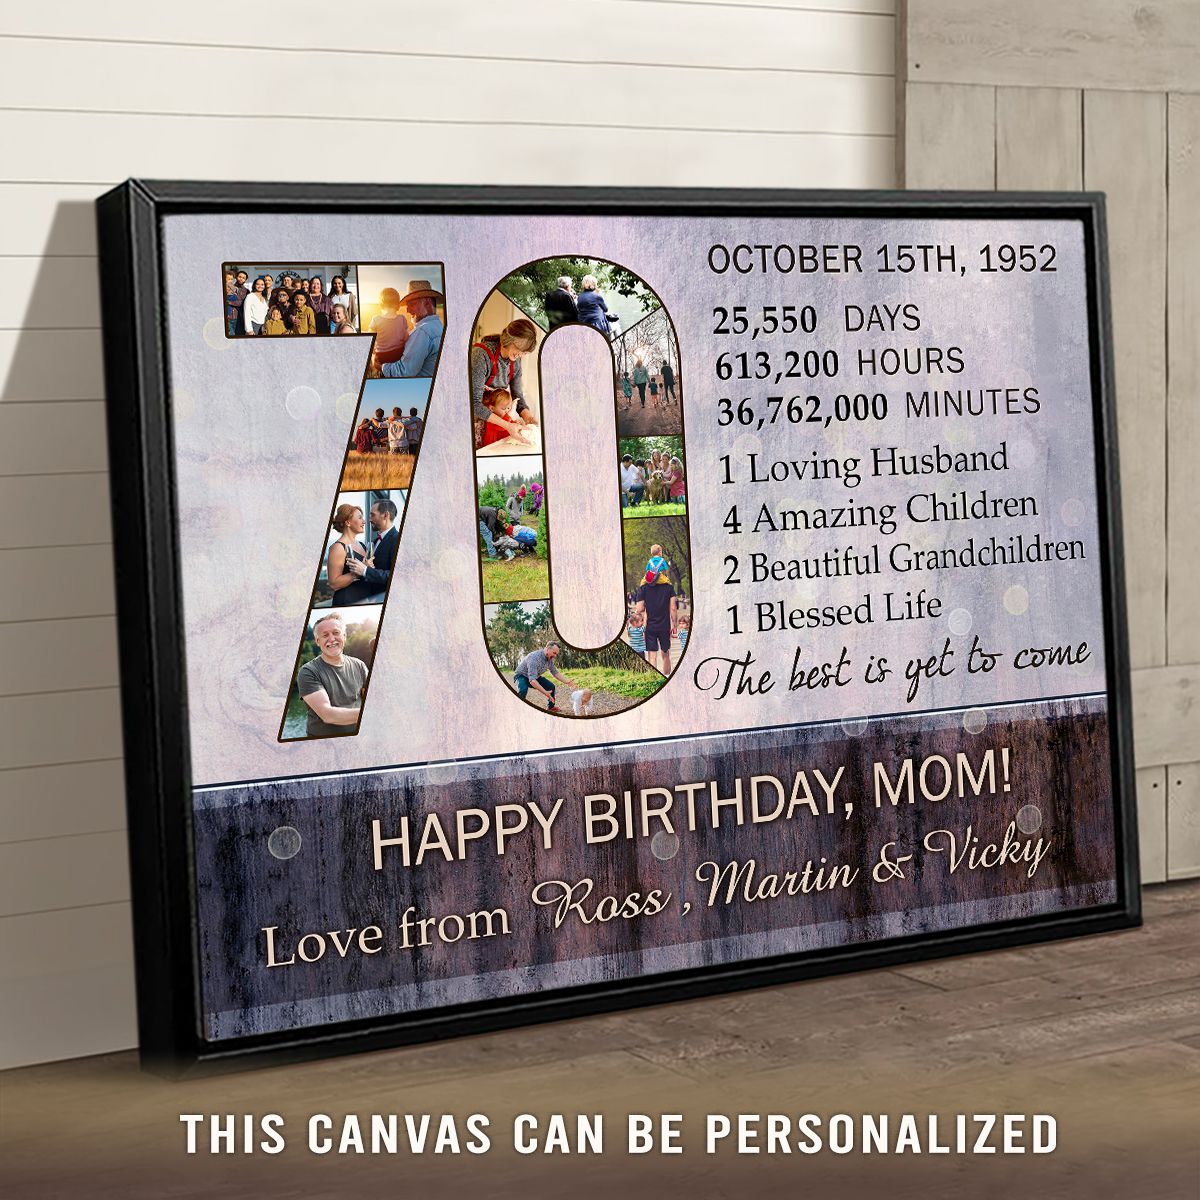 https://images.ohcanvas.com/ohcanvas_com/2022/07/28202556/special-70th-birthday-gifts-for-men-gifts-for-him-custom-photo-canvas-collage-03.jpg